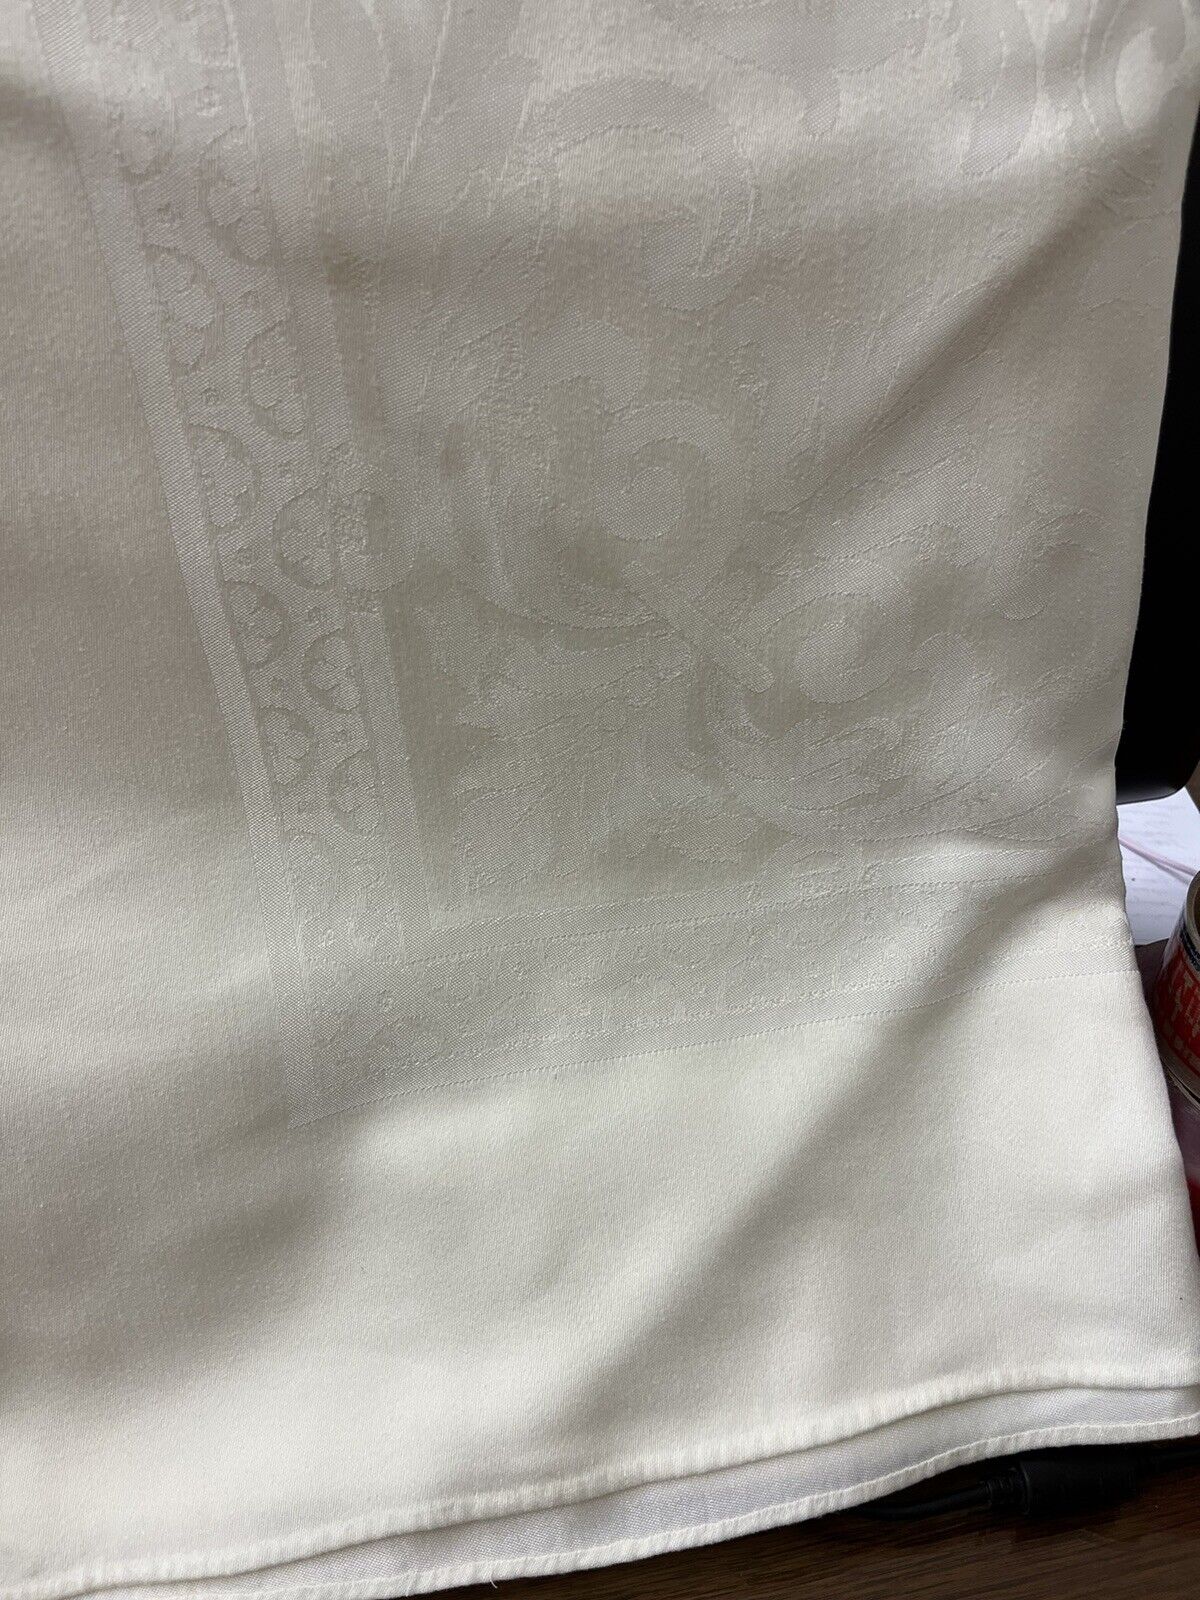 Vintage Linen Damask Tablecloth, floral and scroll design, 70” x 96” Cream/ivory